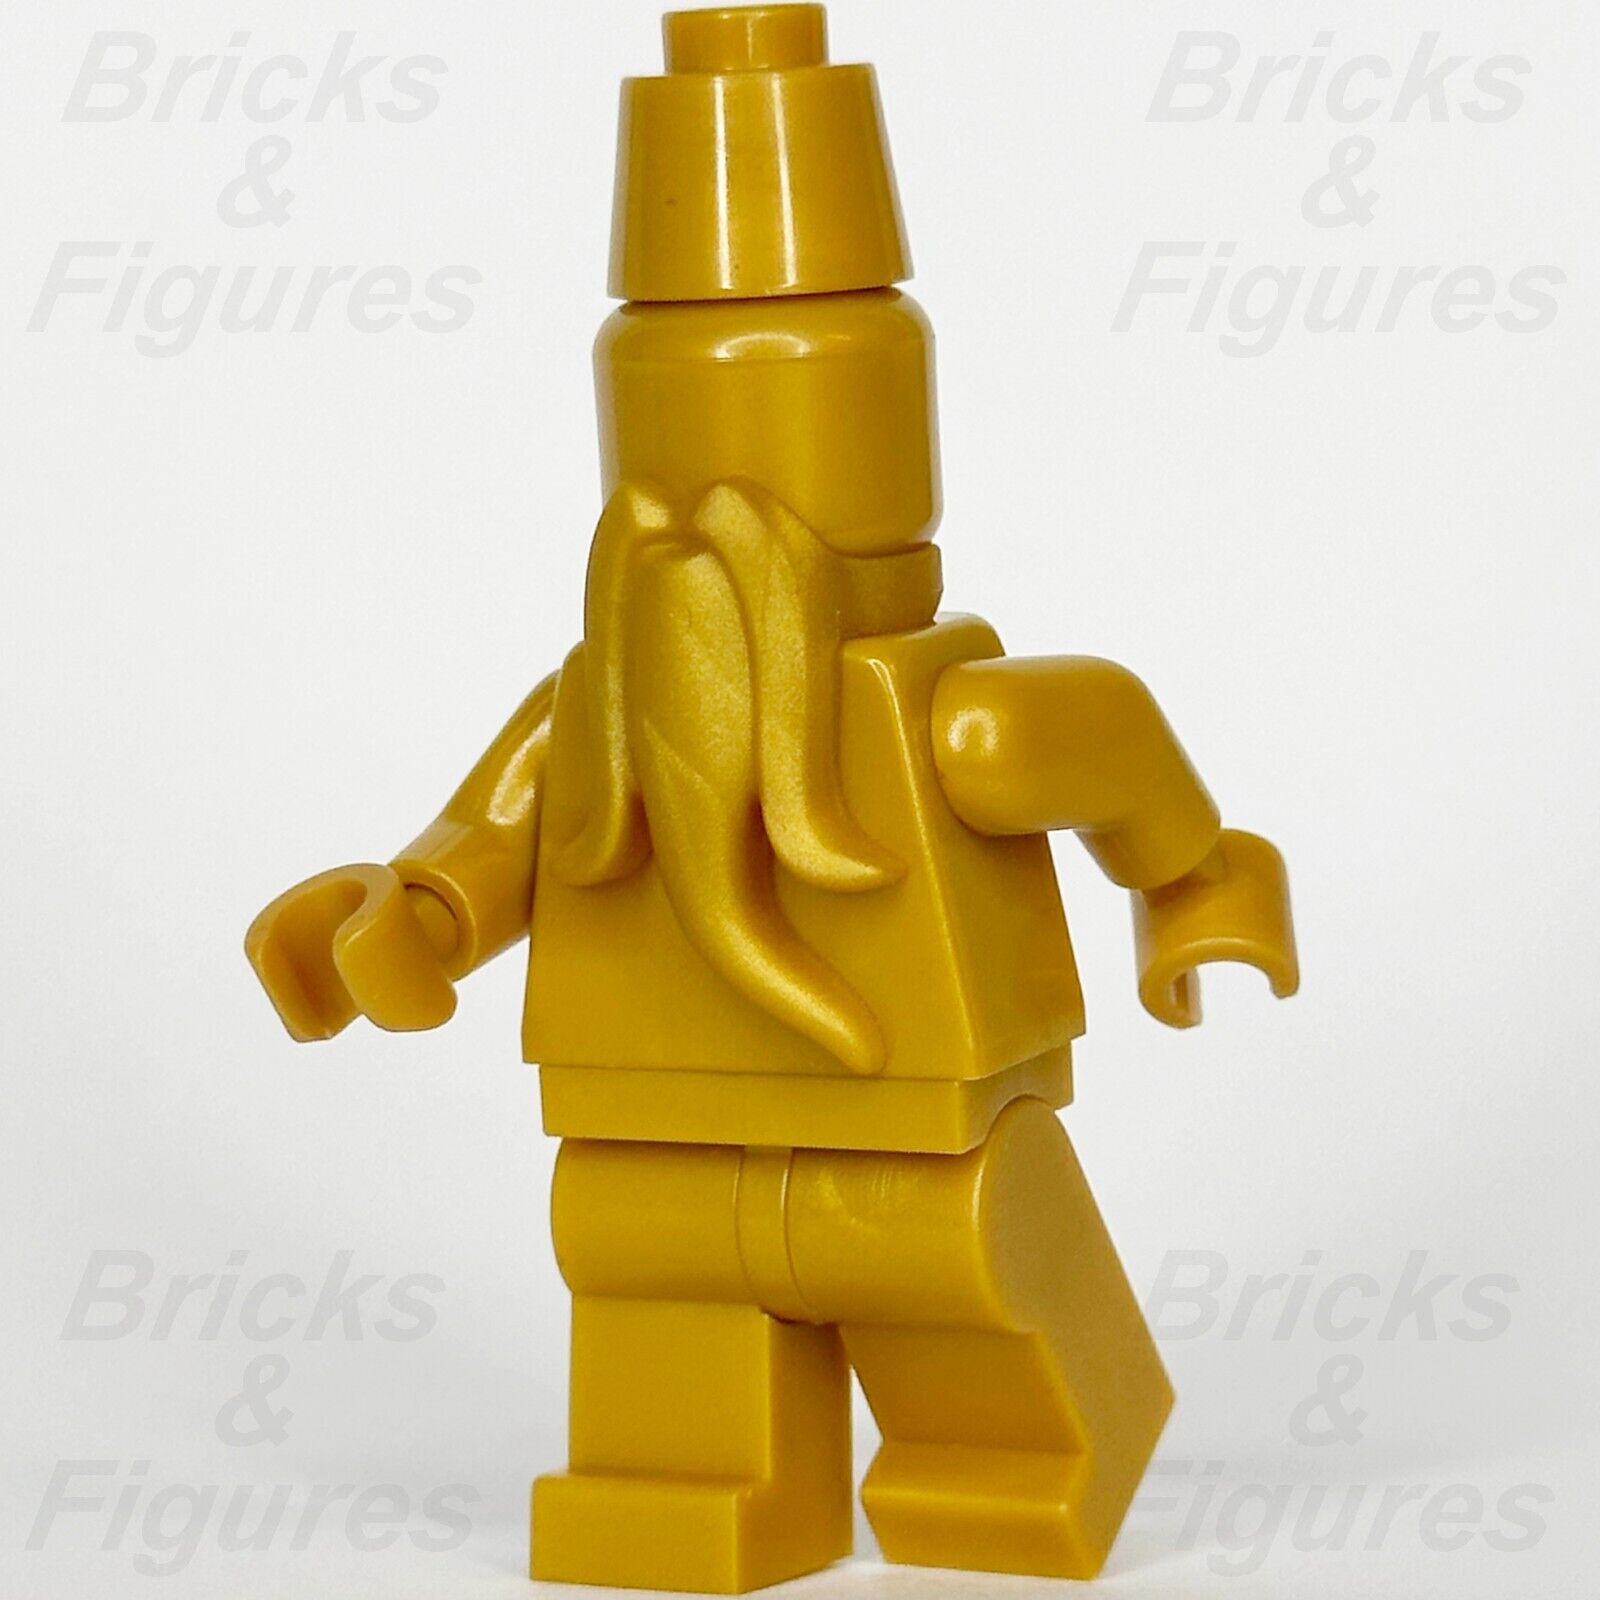 LEGO Harry Potter The Ministry of Magic Statue Minifigure Gold 76403 hp363 - Bricks & Figures